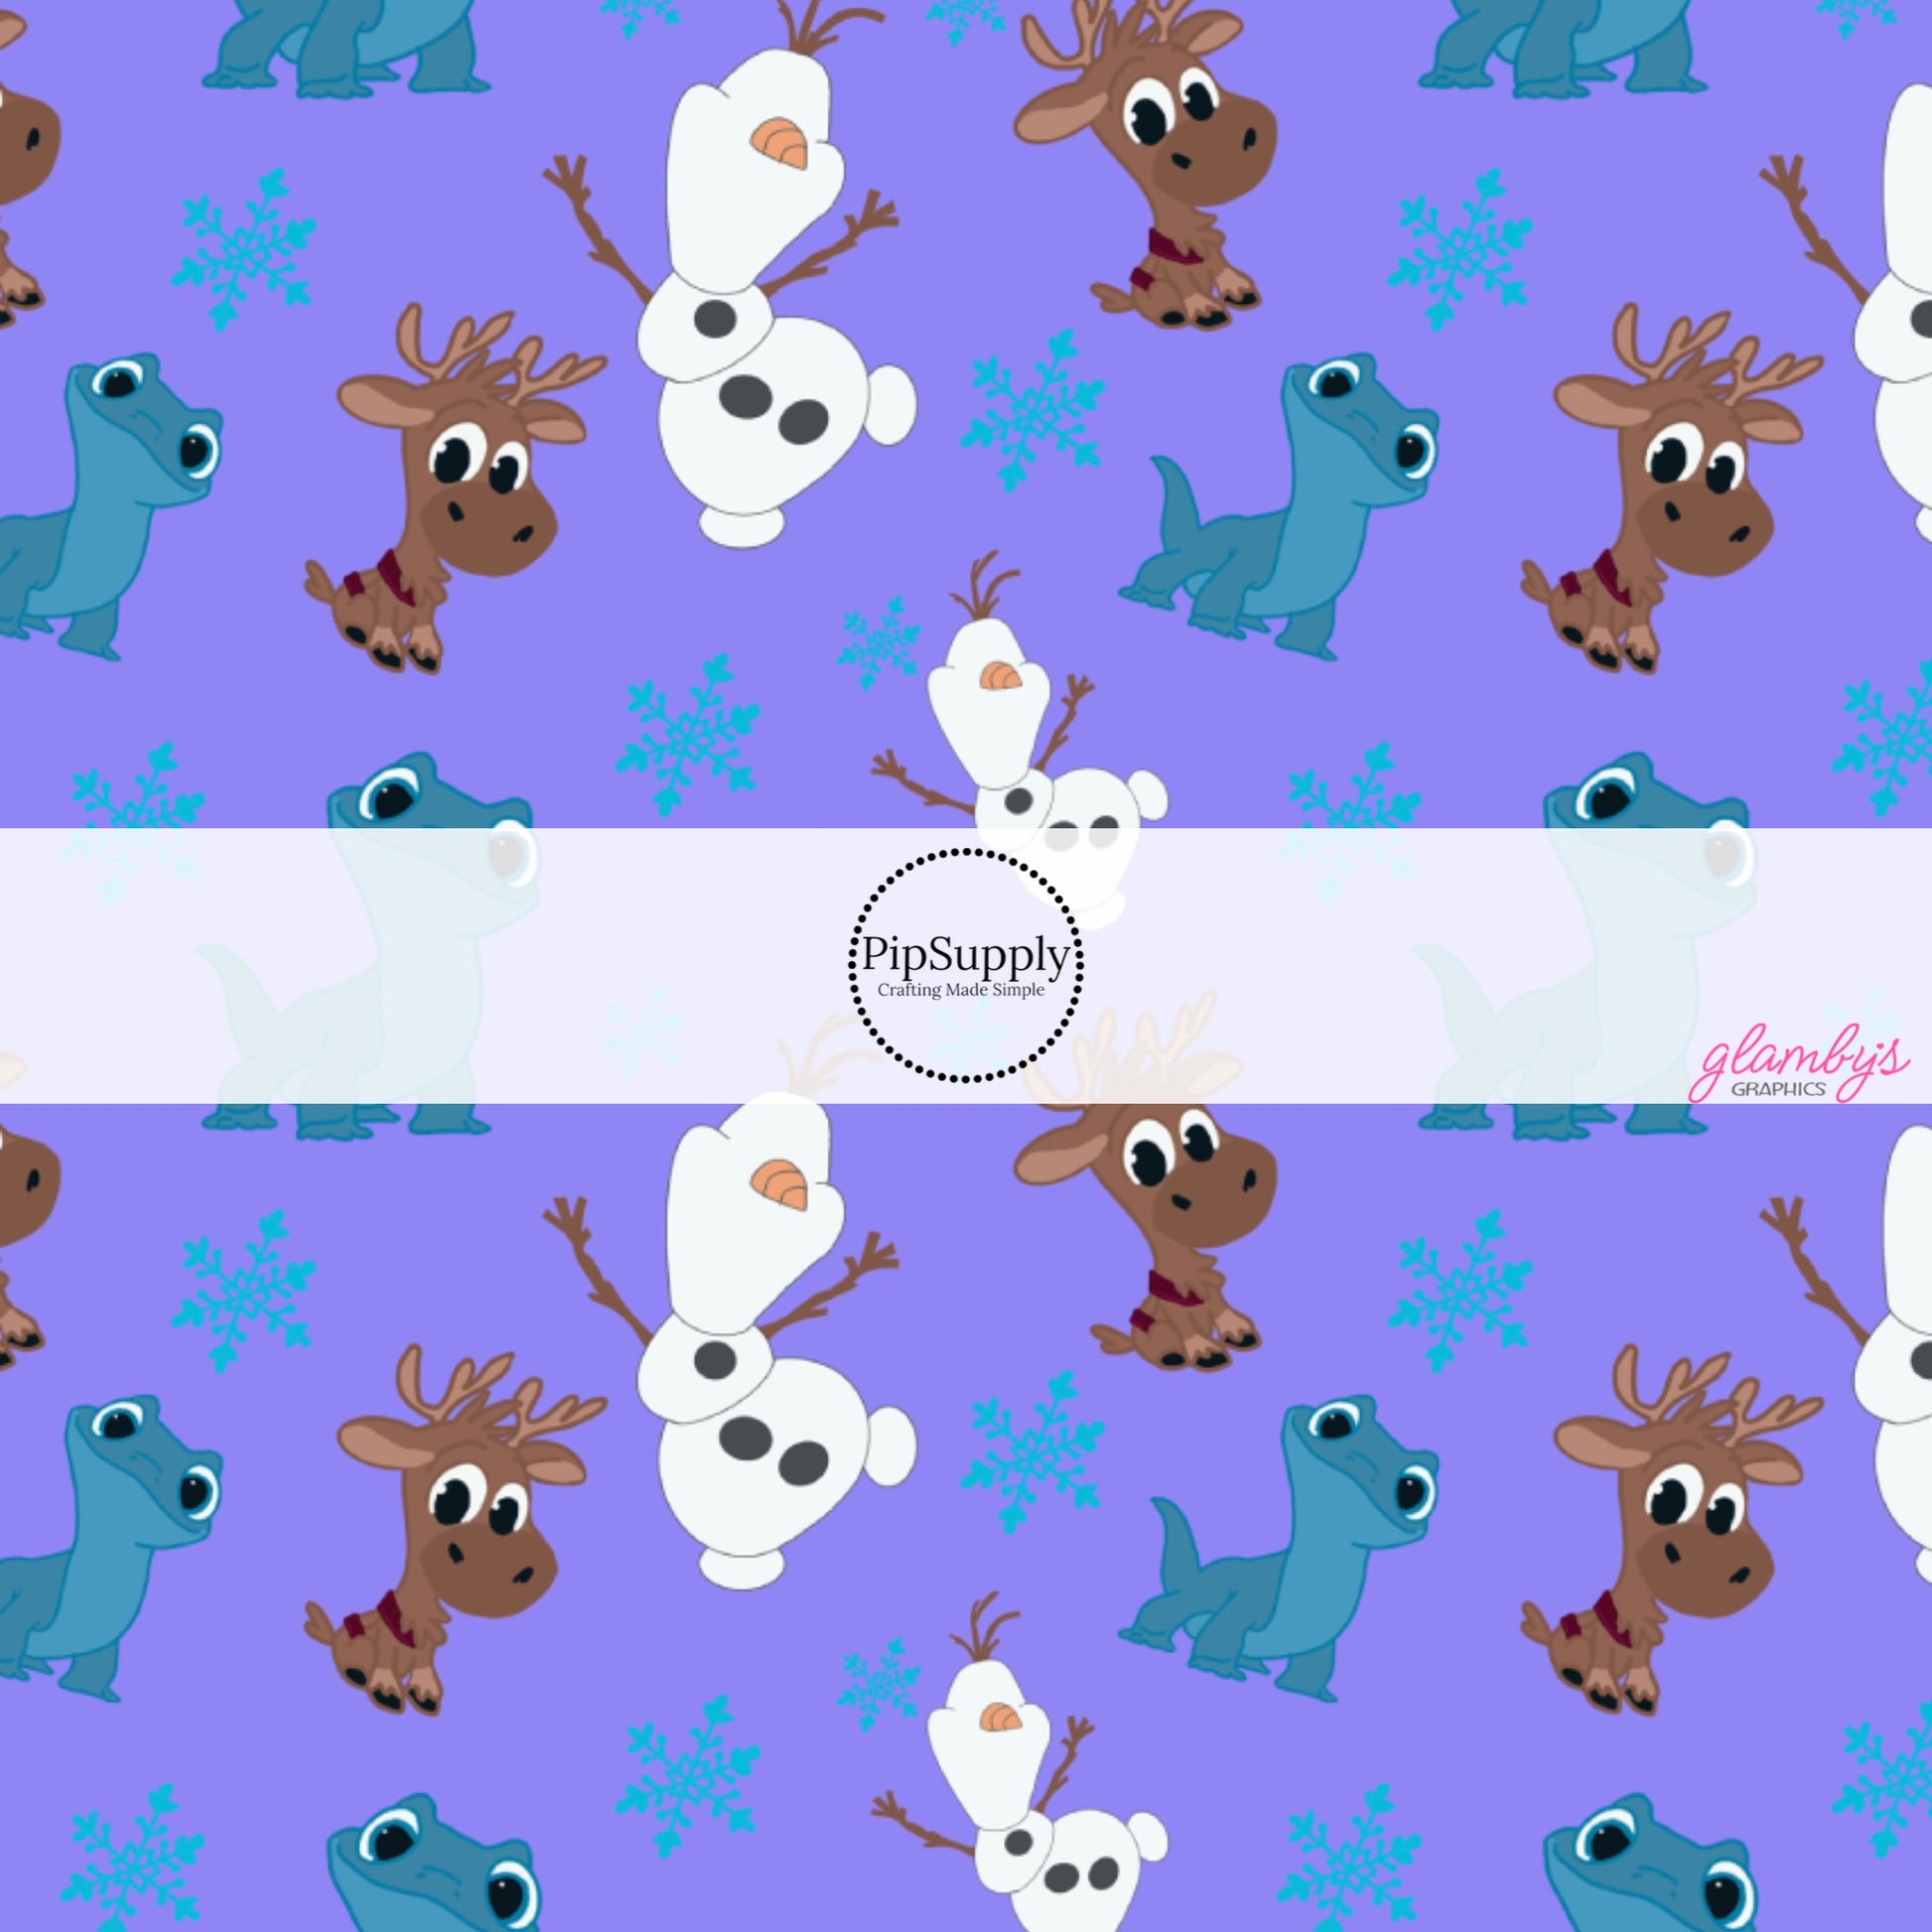 These winter movie themed inspired themed no sew bow strips can be easily tied and attached to a clip for a finished hair bow. These fun themed patterned bow strips are great for personal use or to sell. These bow strips feature the following snowman, reindeers, and salamander friends surrounded by snowflakes on purple.